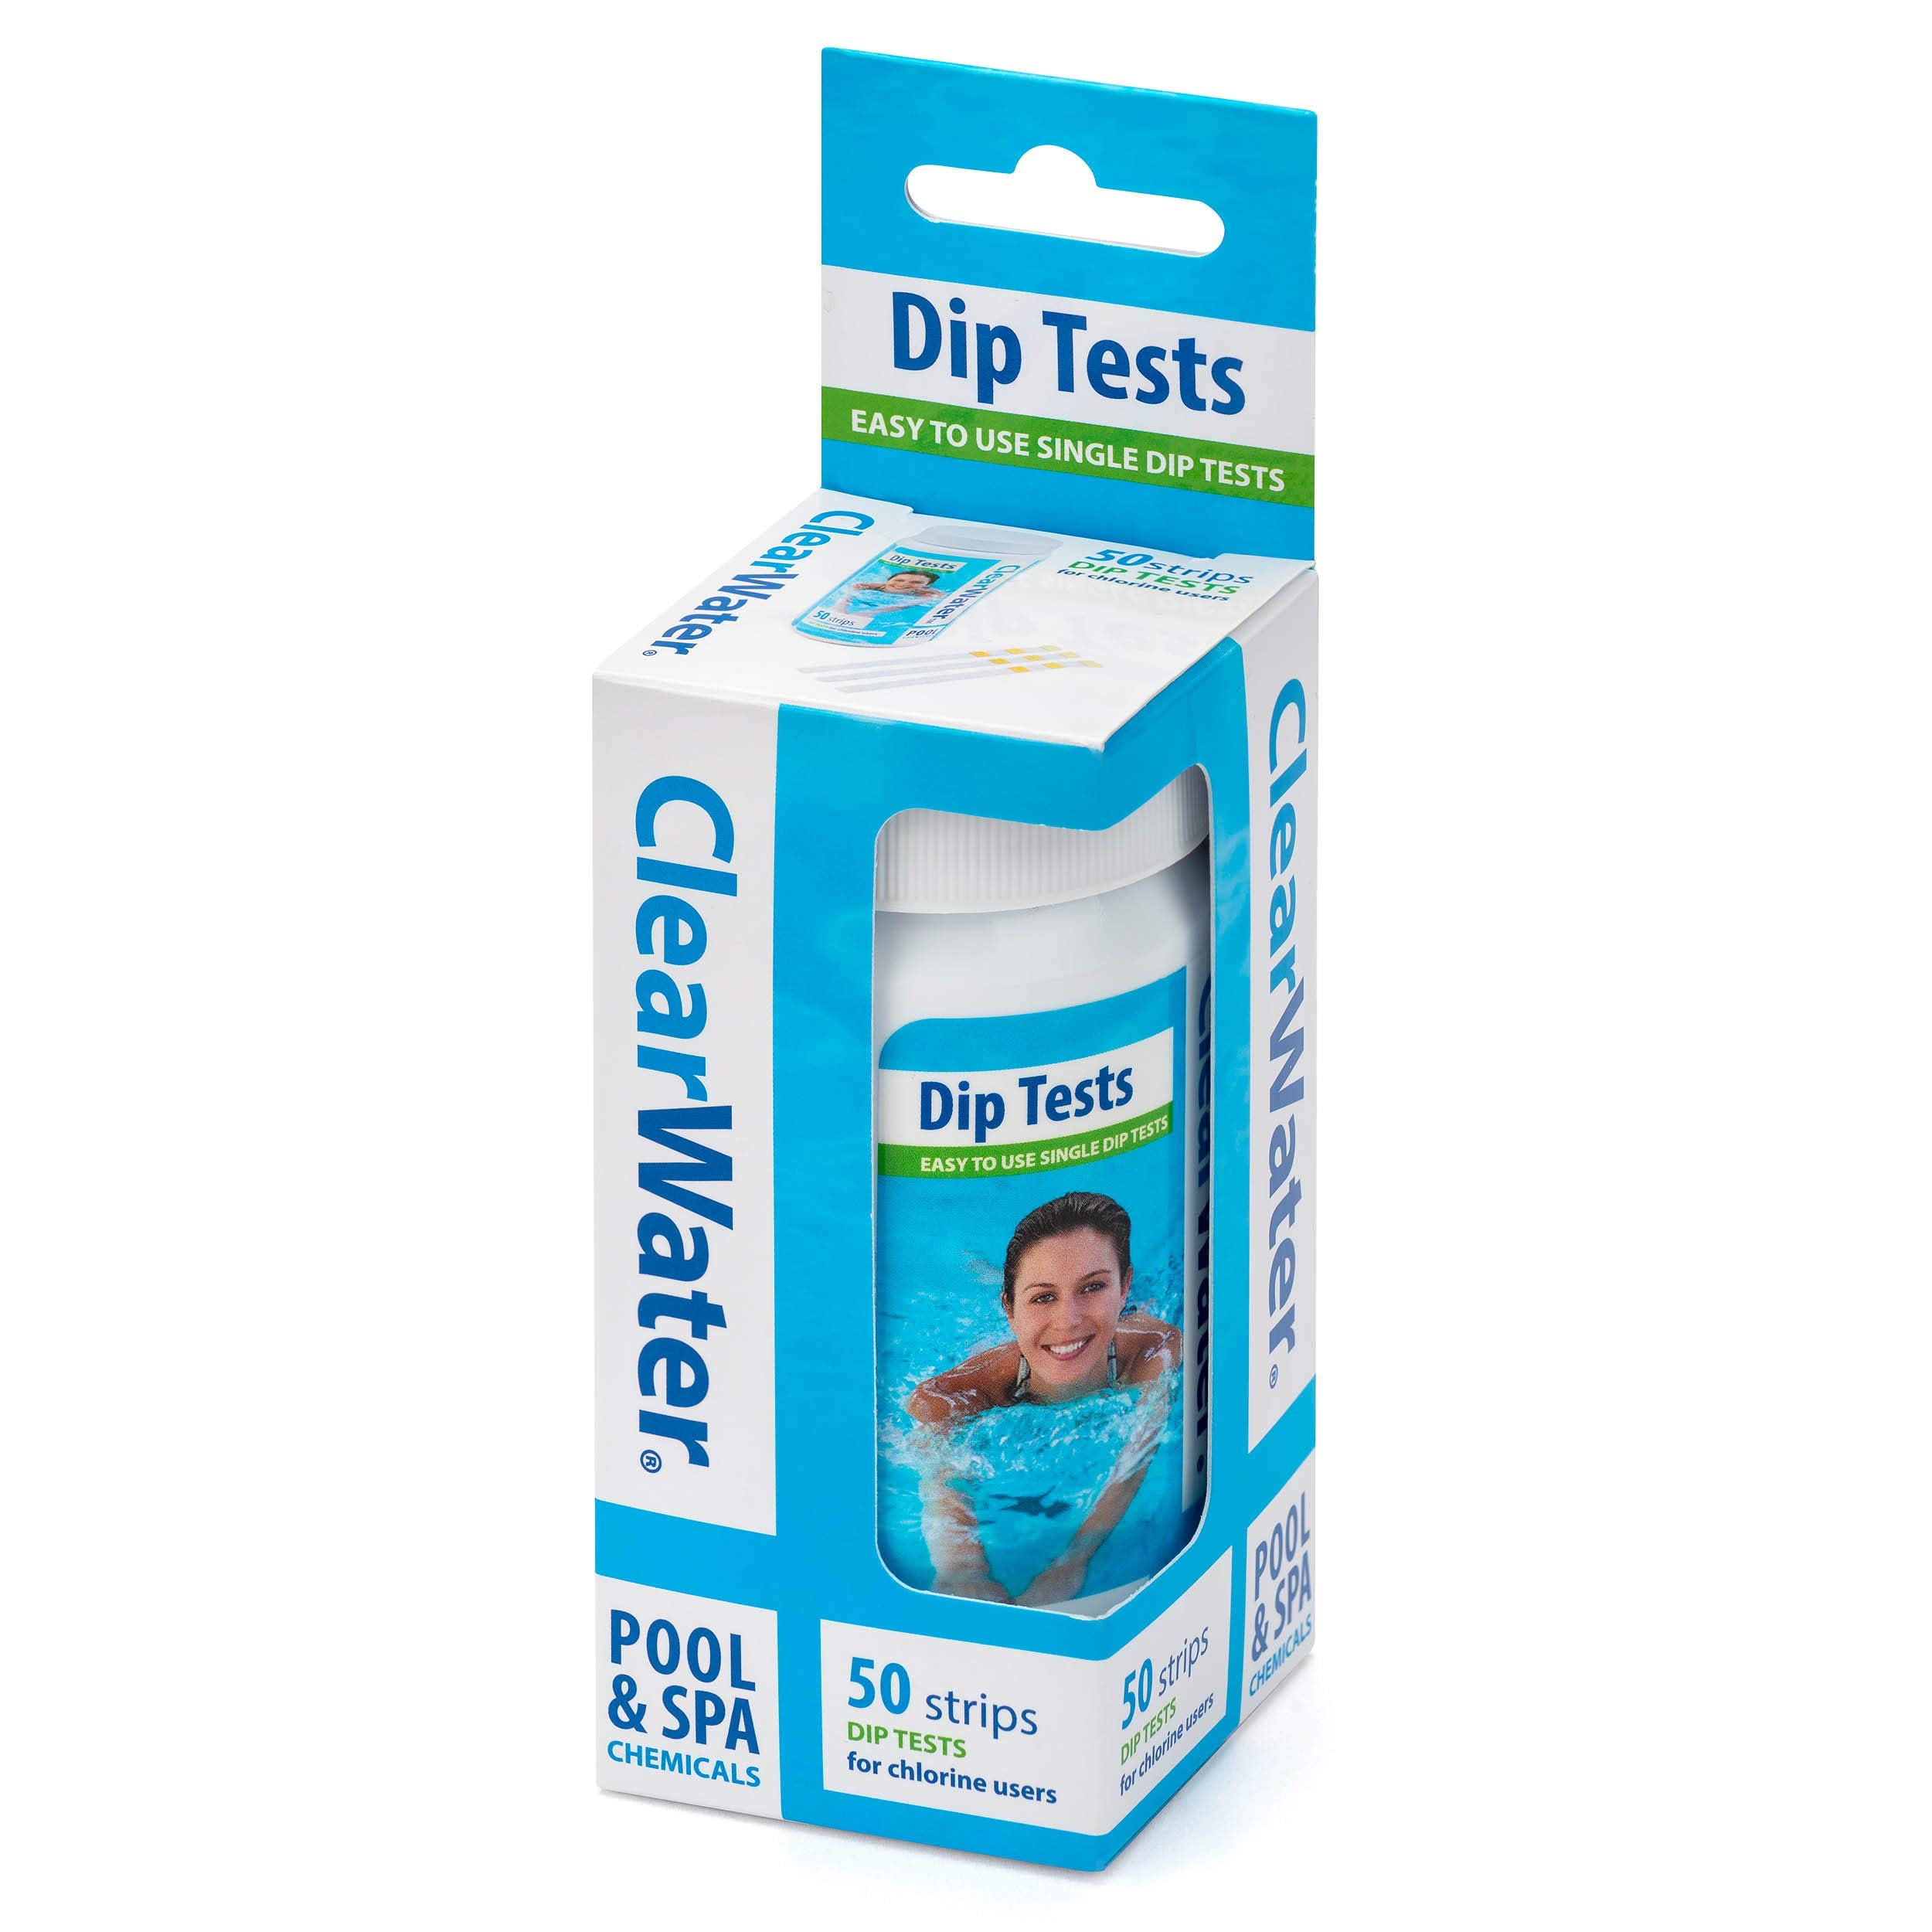 Clear water Hot Tub, Pool and Spa Test Strips x 50-3 in 1 - Measures Chlorine, PH and Total Alkalinit (Pack of 1 (50 Strips))